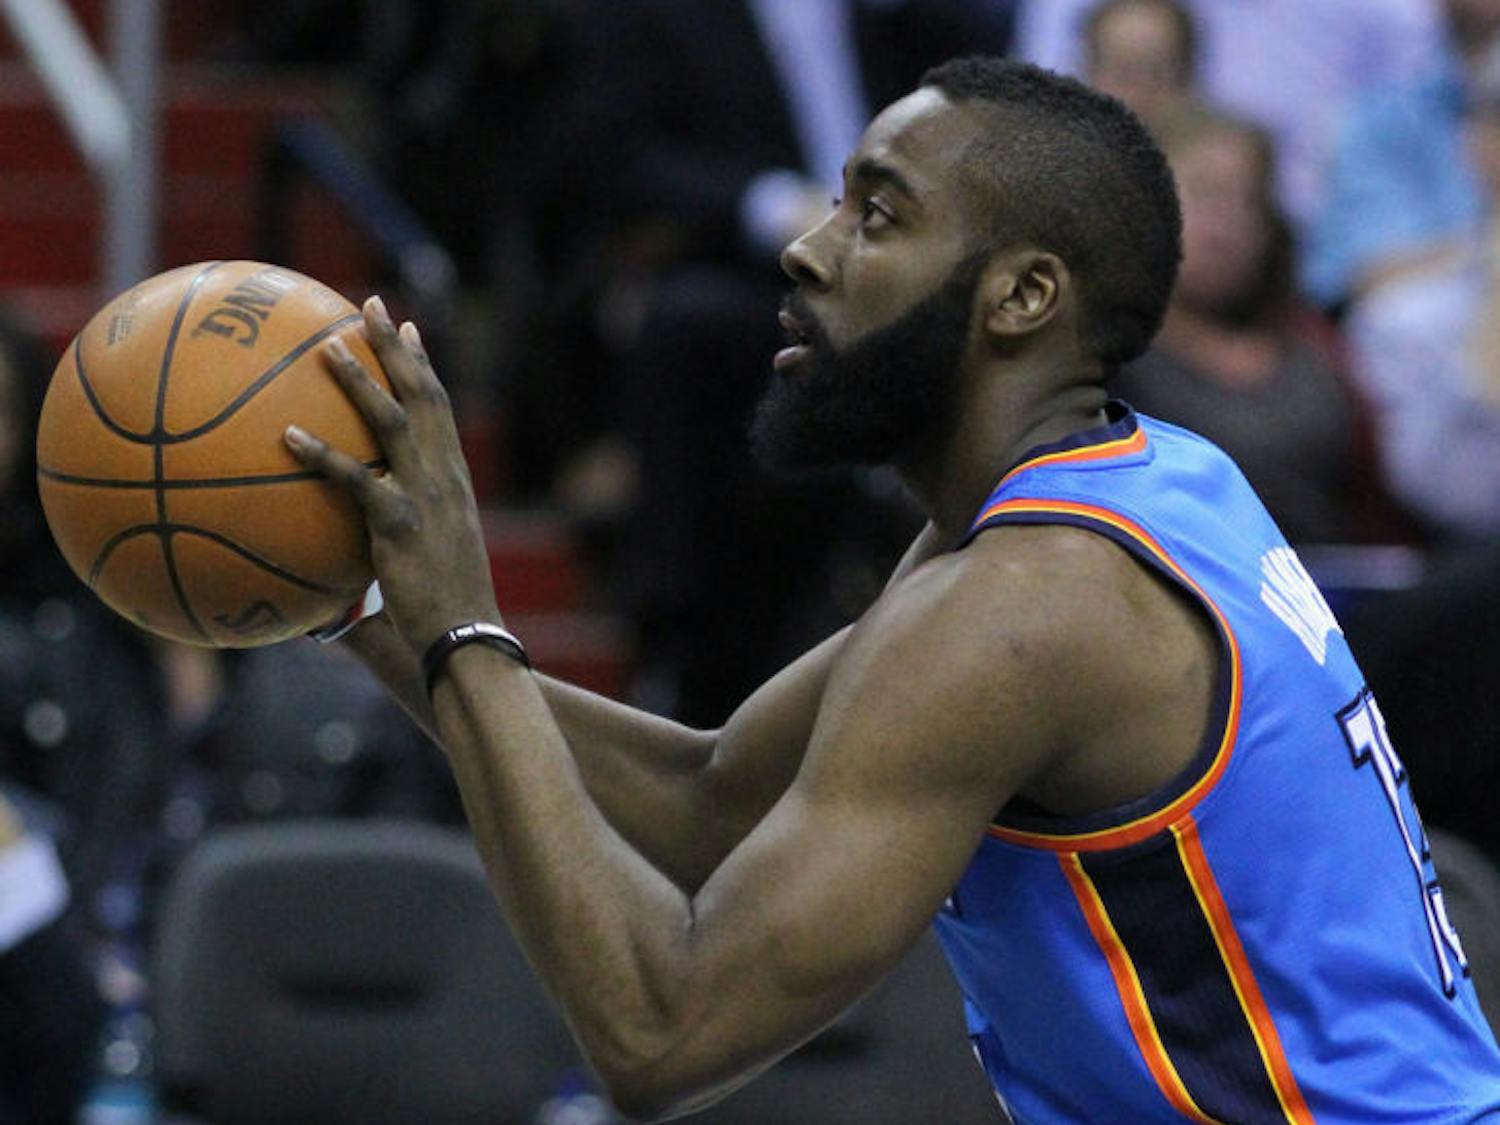 "James Harden..." by Keith Allison, used under CC BY-SA 2.0